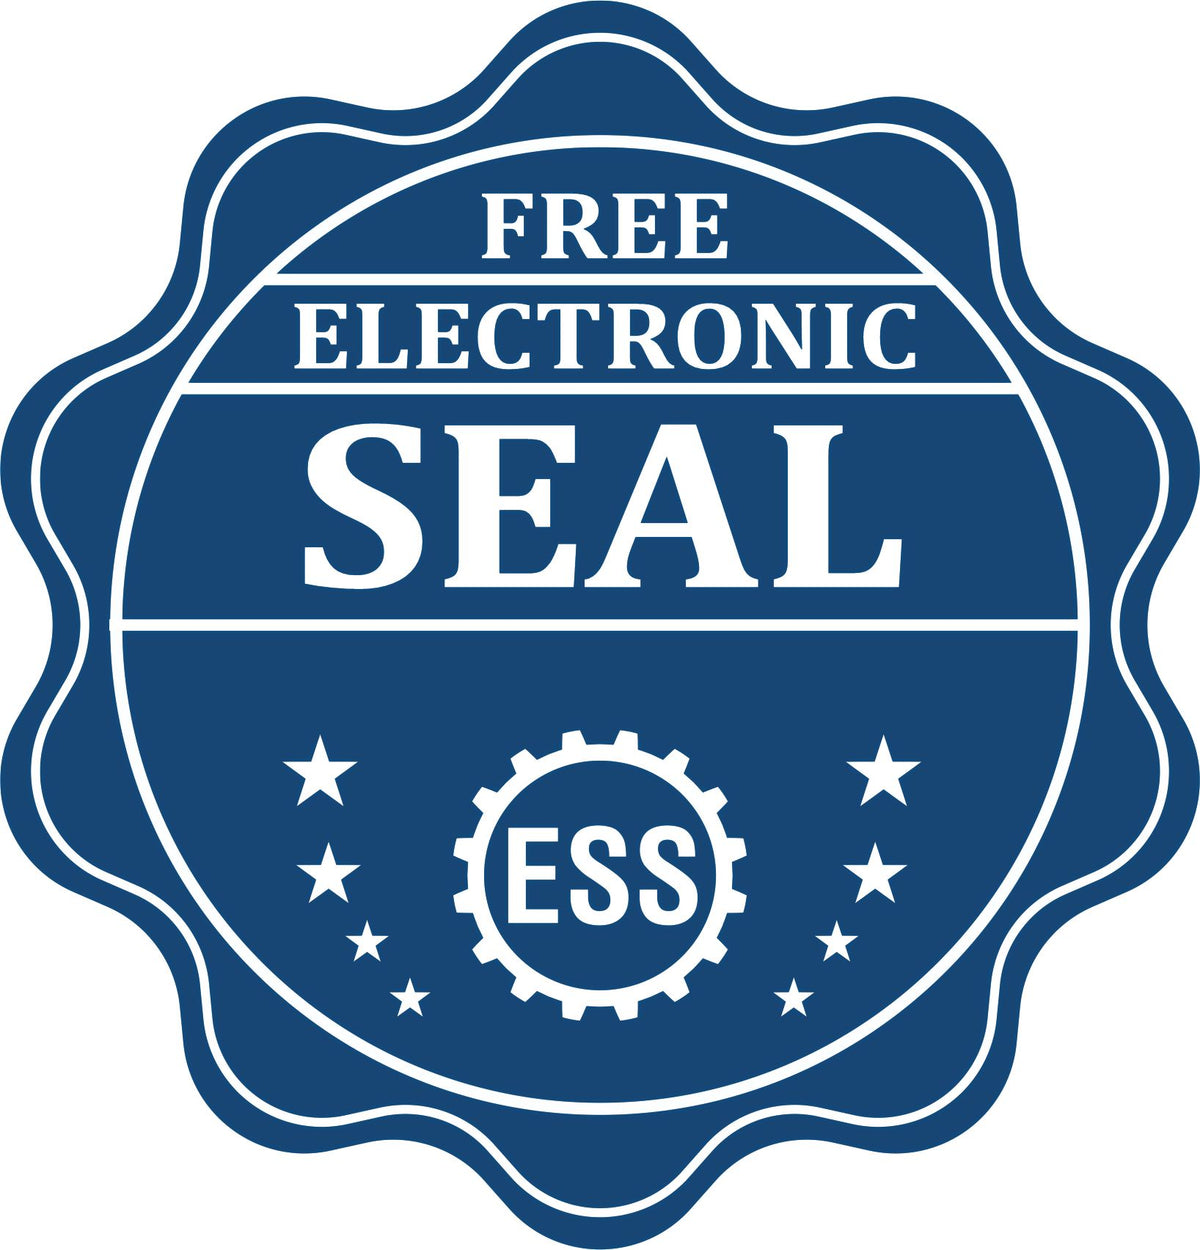 A badge showing a free electronic seal for the Long Reach Vermont PE Seal with stars and the ESS gear on the emblem.